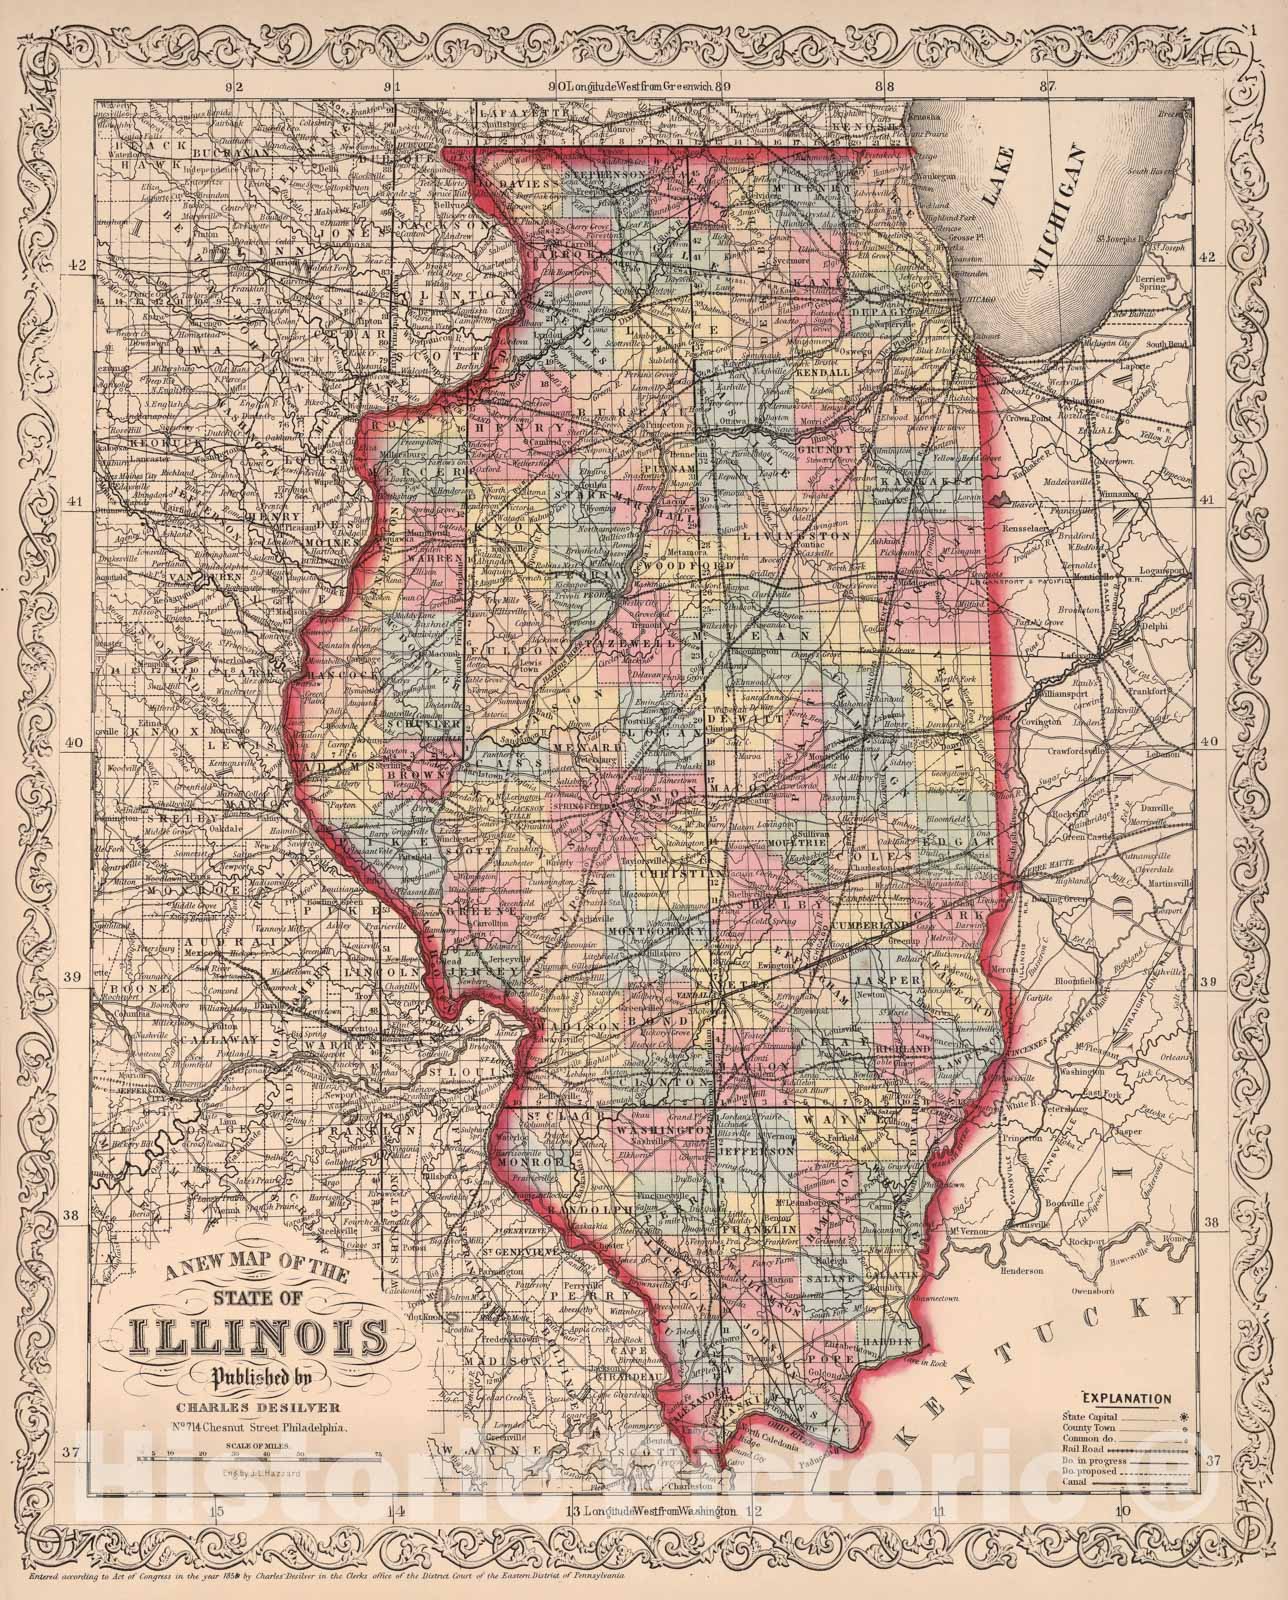 Historic Map - A New Map of the State of Illinois : Published by Charles Desilver, 1859 - Vintage Wall Art